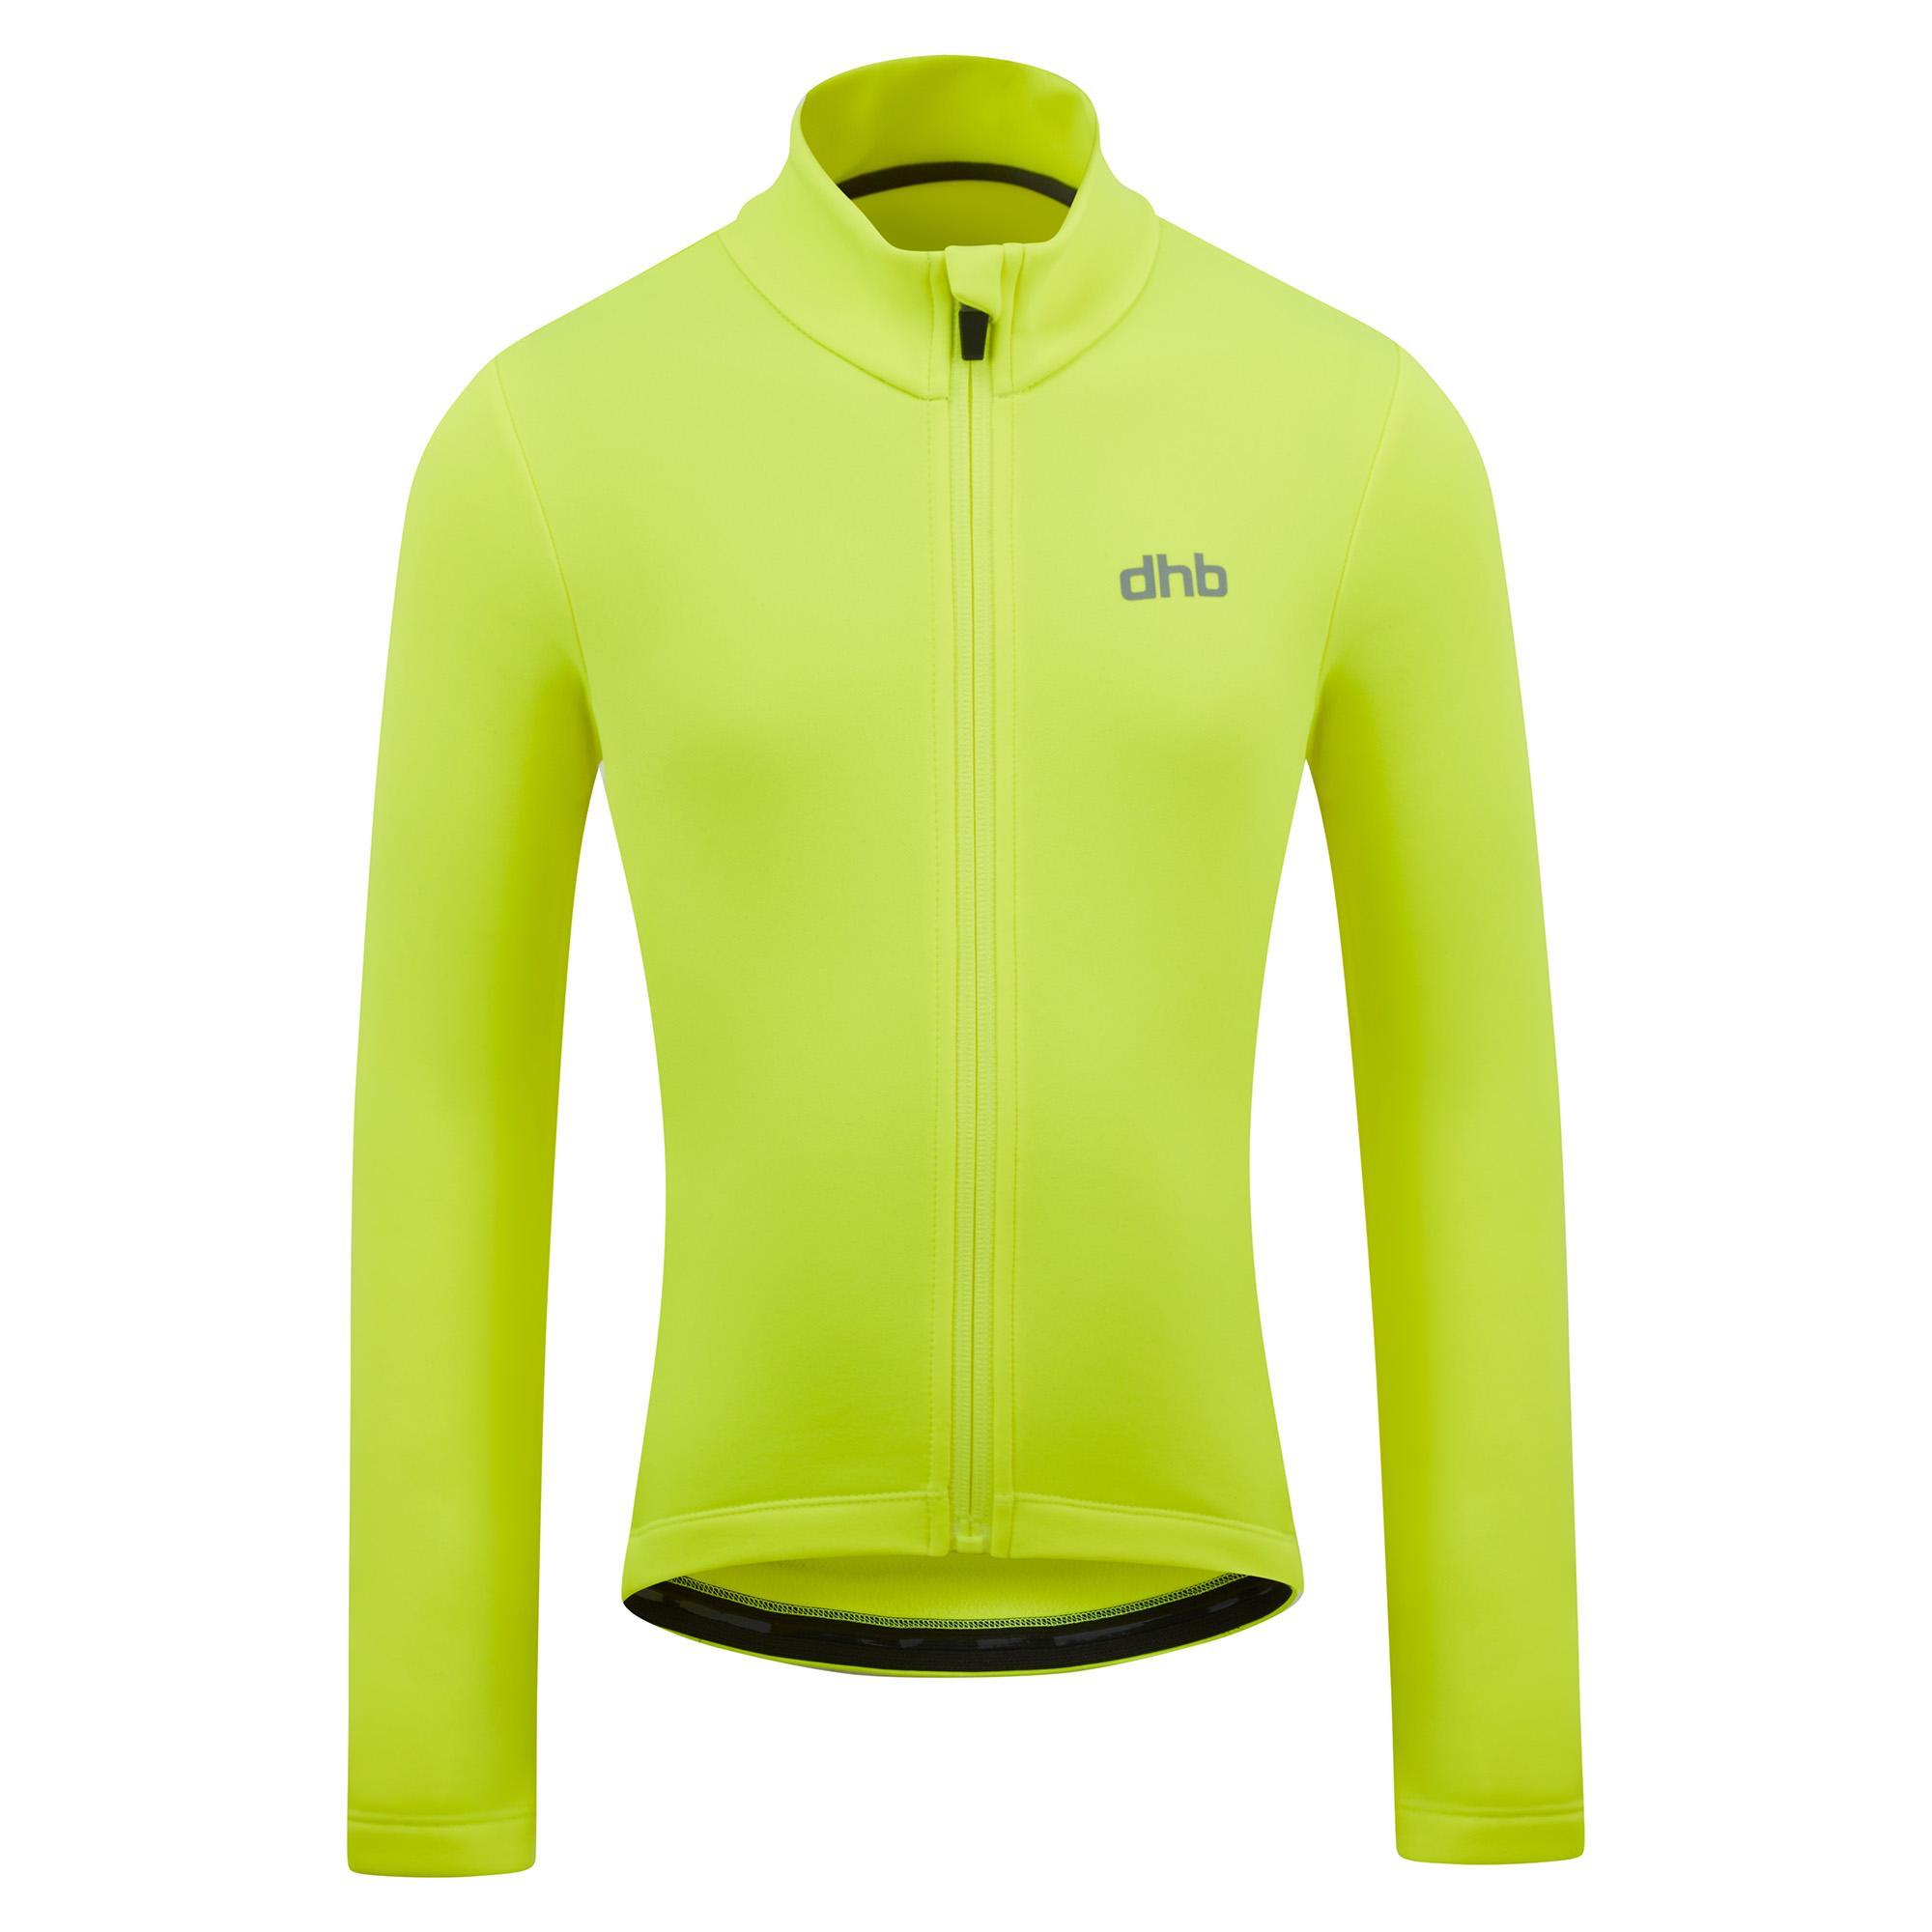 Dhb Kids Long Sleeve Thermal Jersey - Yellow Fluorescent